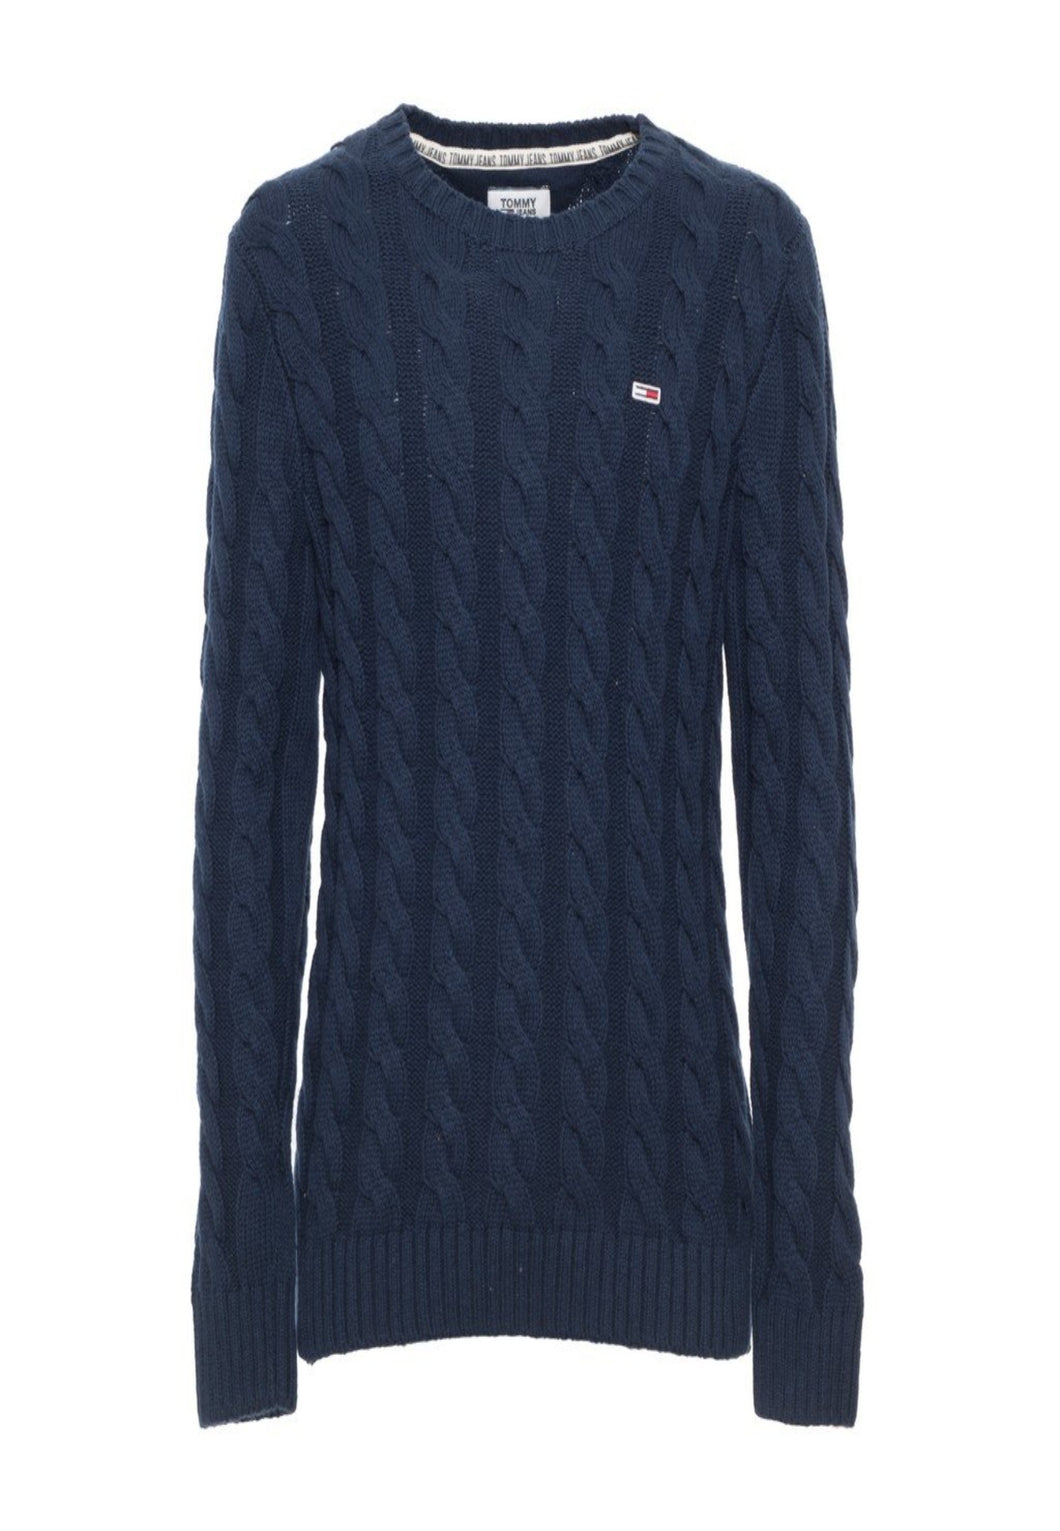 TJM Essential Cable Sweater